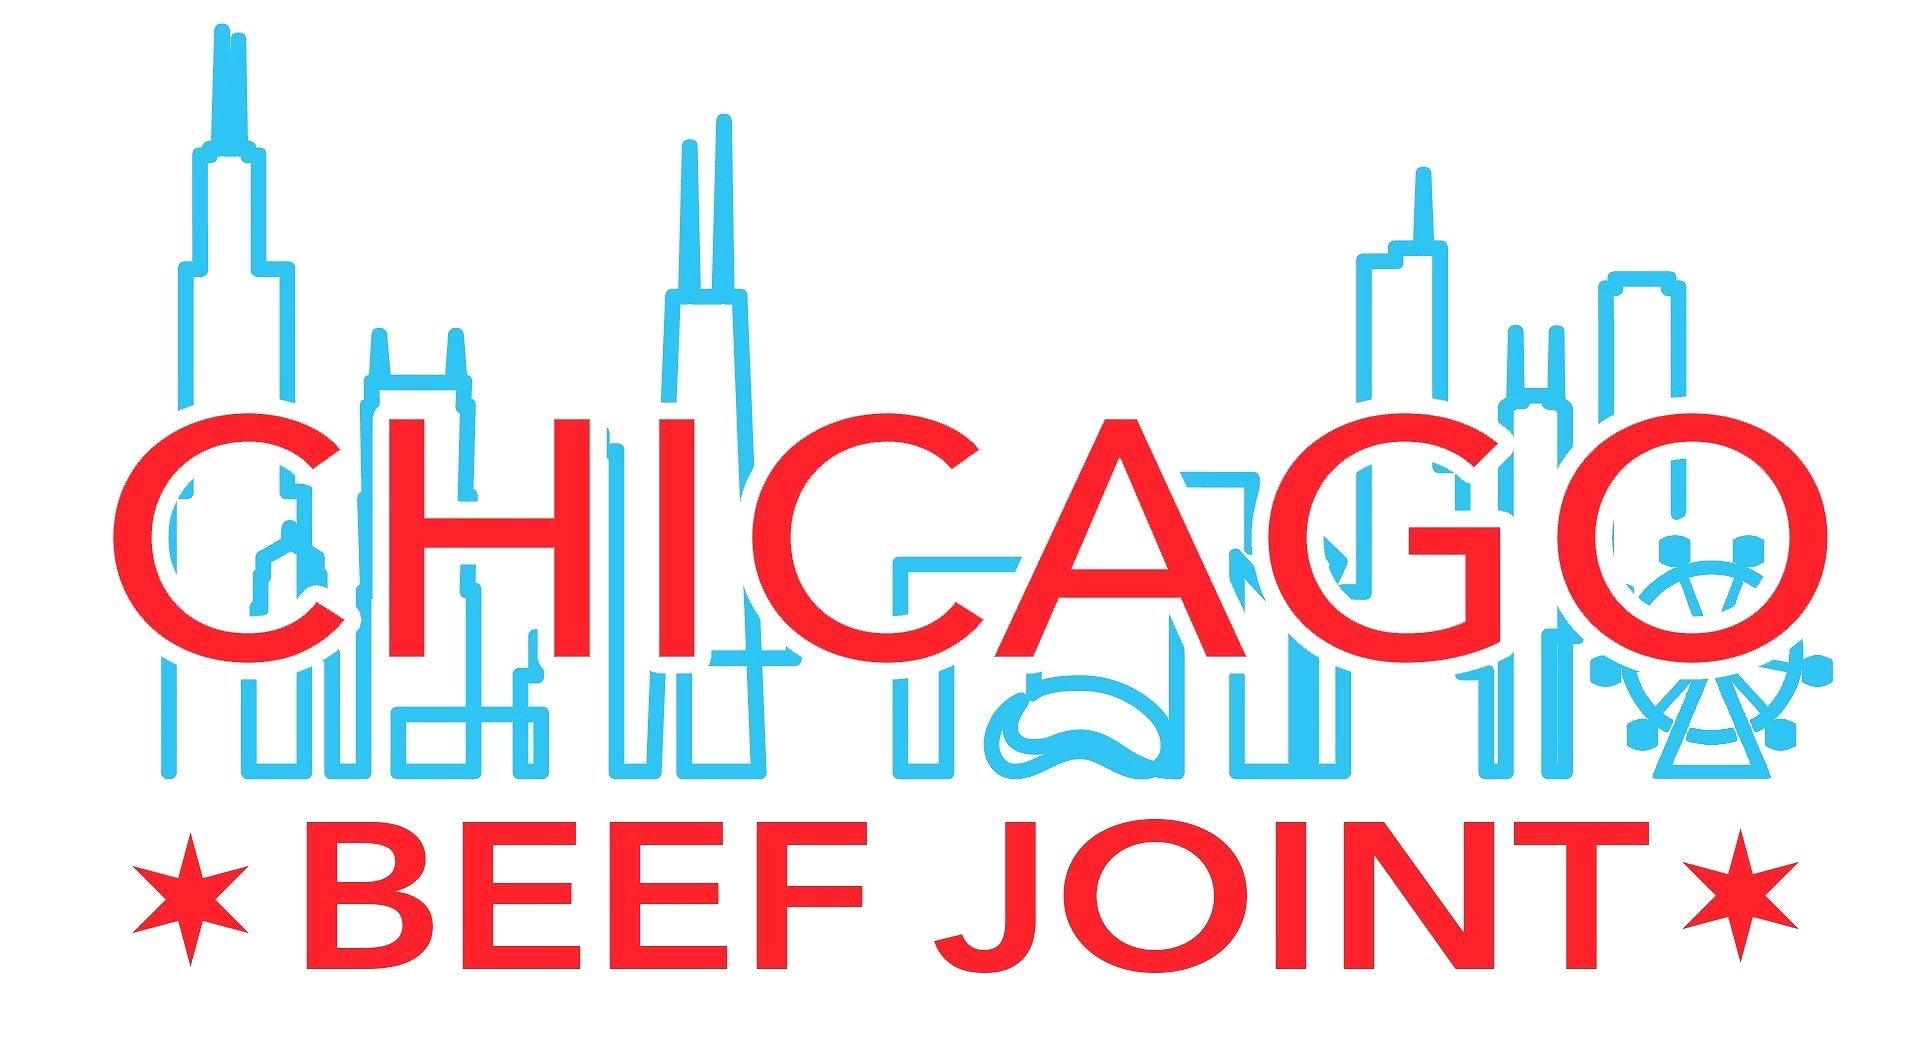 Chicago Beef Joint